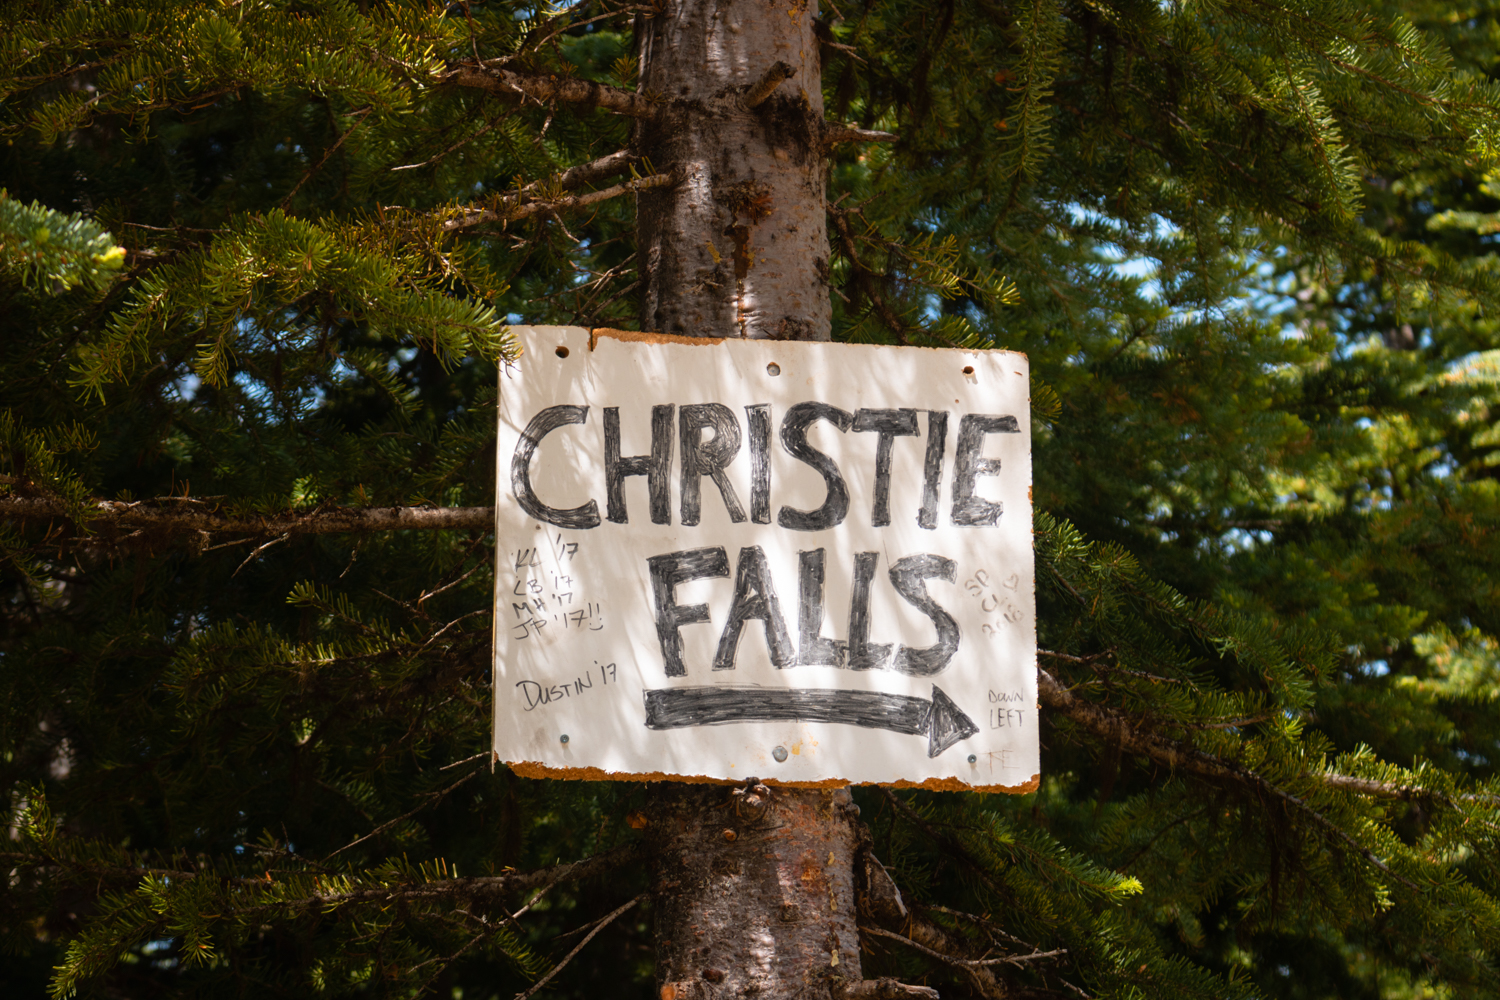 Sign that says "Christie Falls" in the trees.